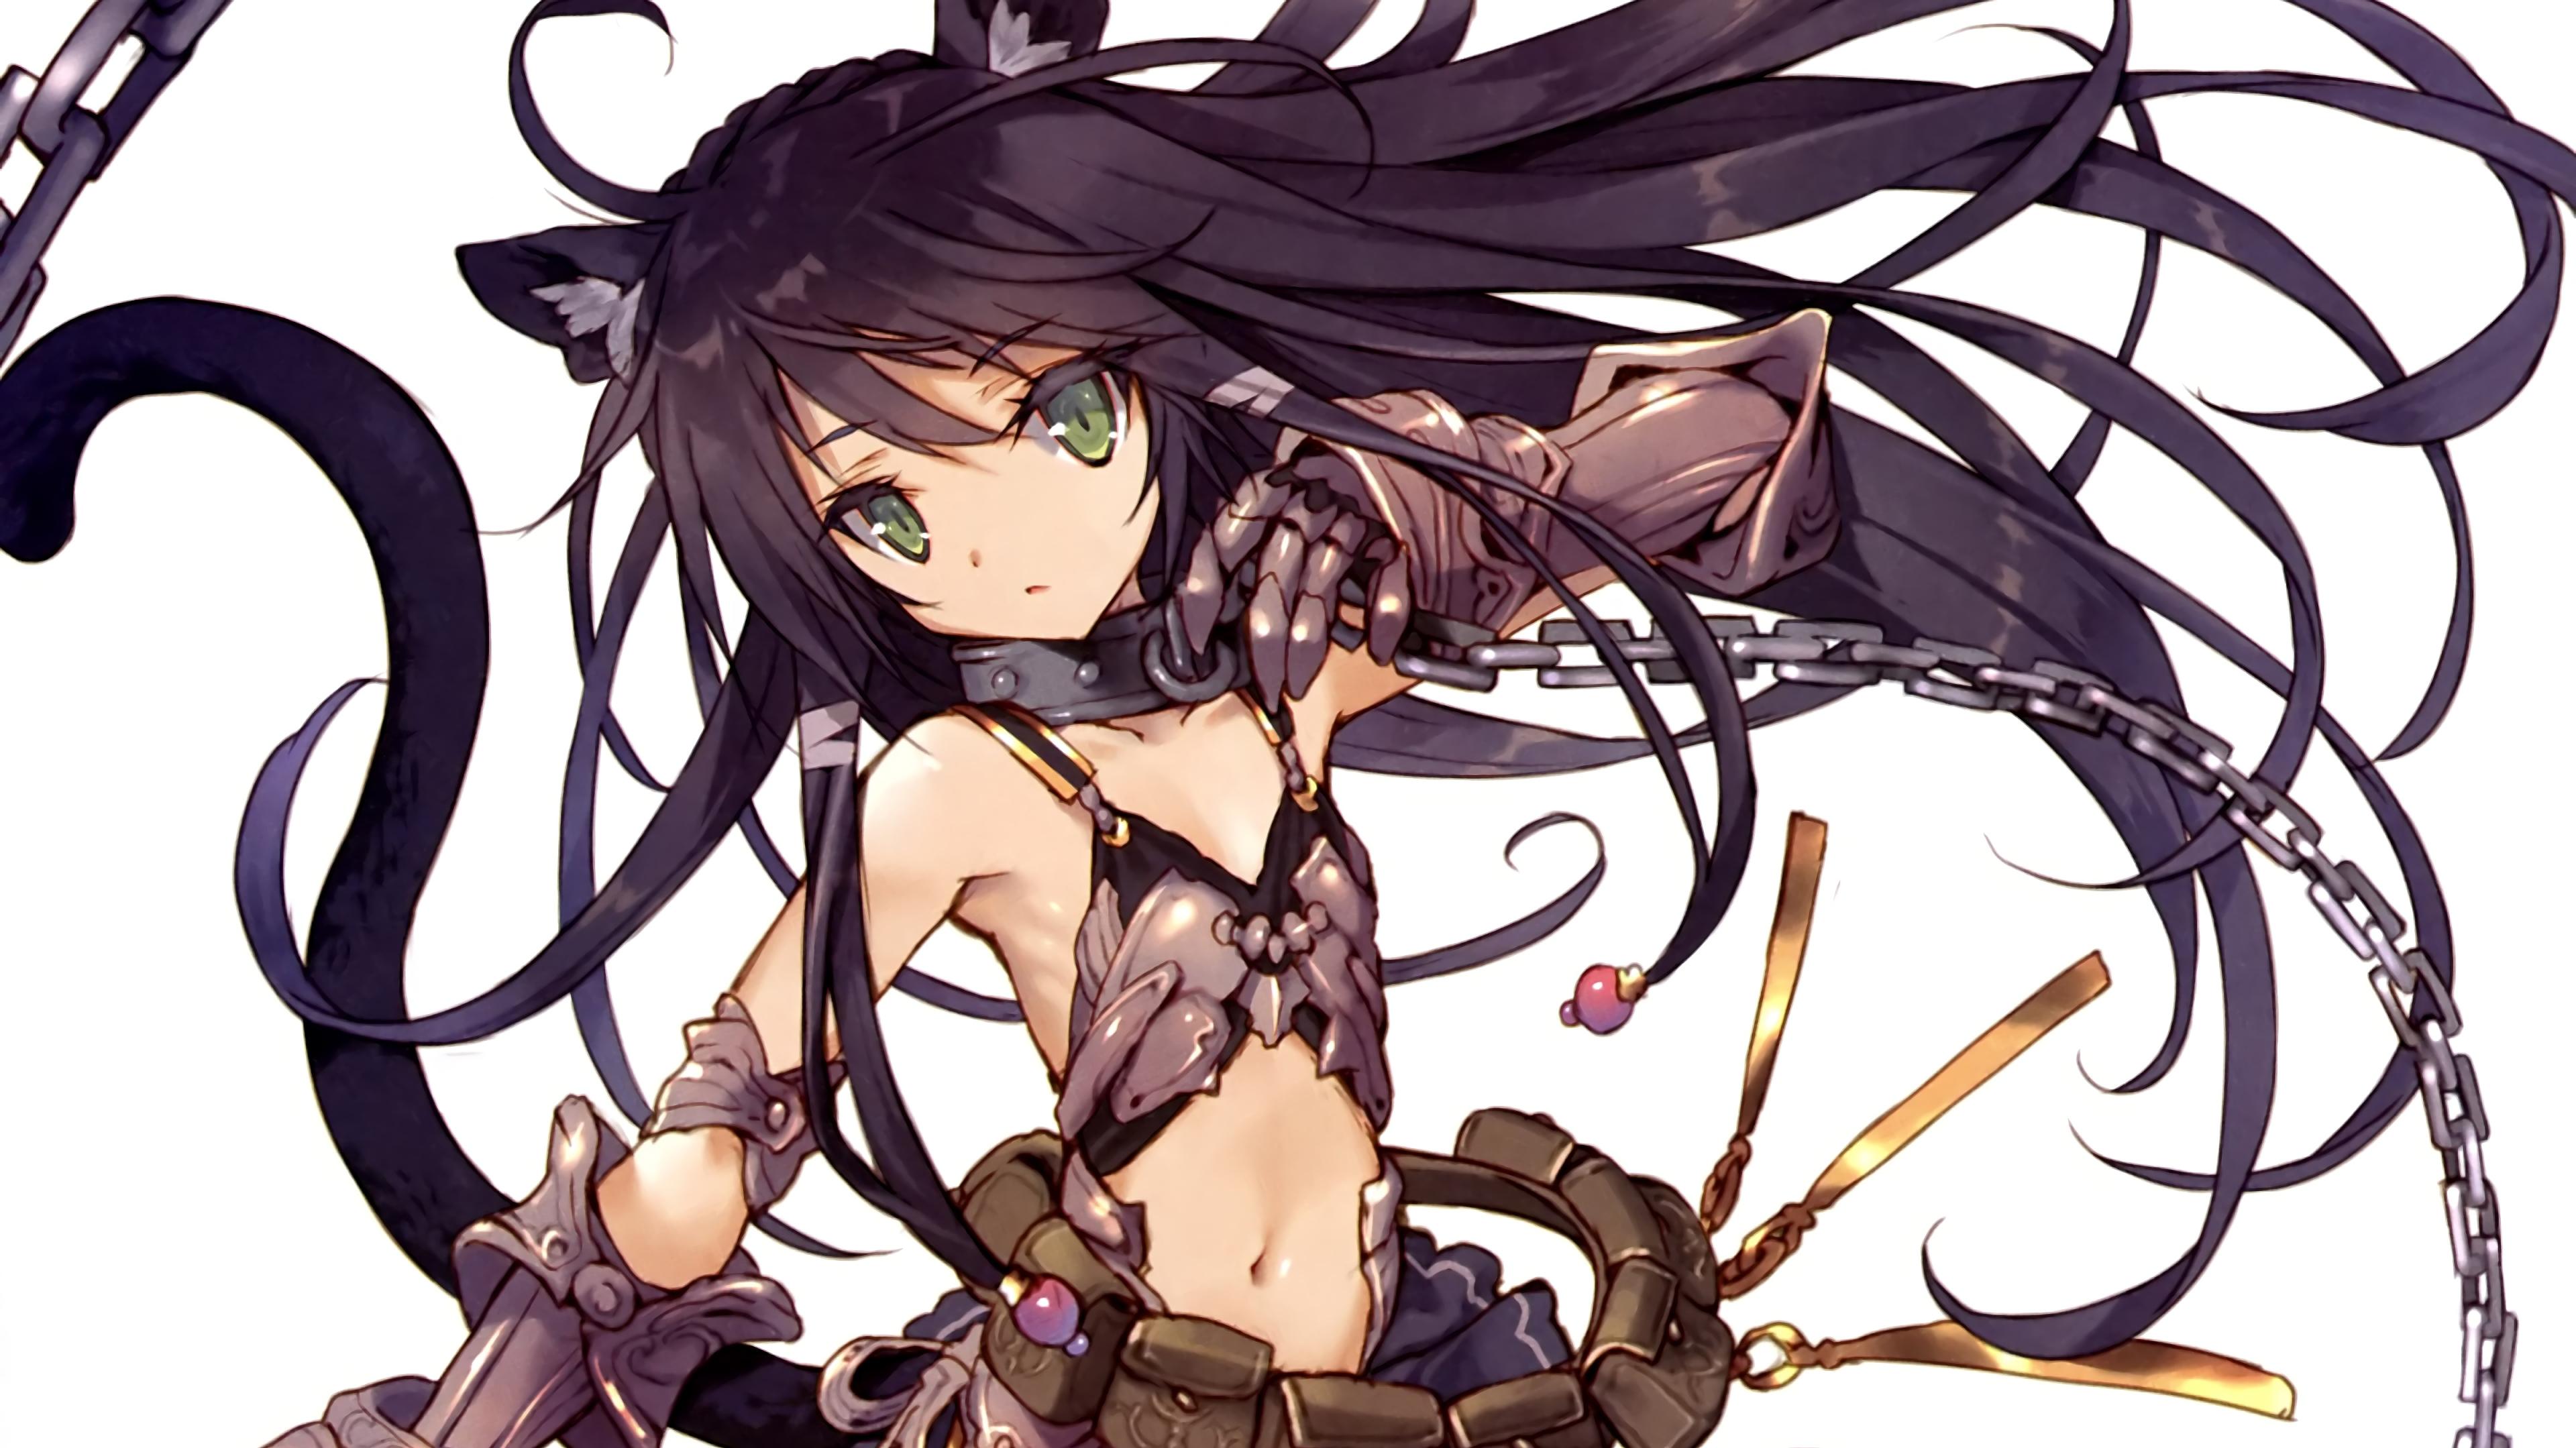 Download How Not To Summon A Demon Lord wallpapers for mobile